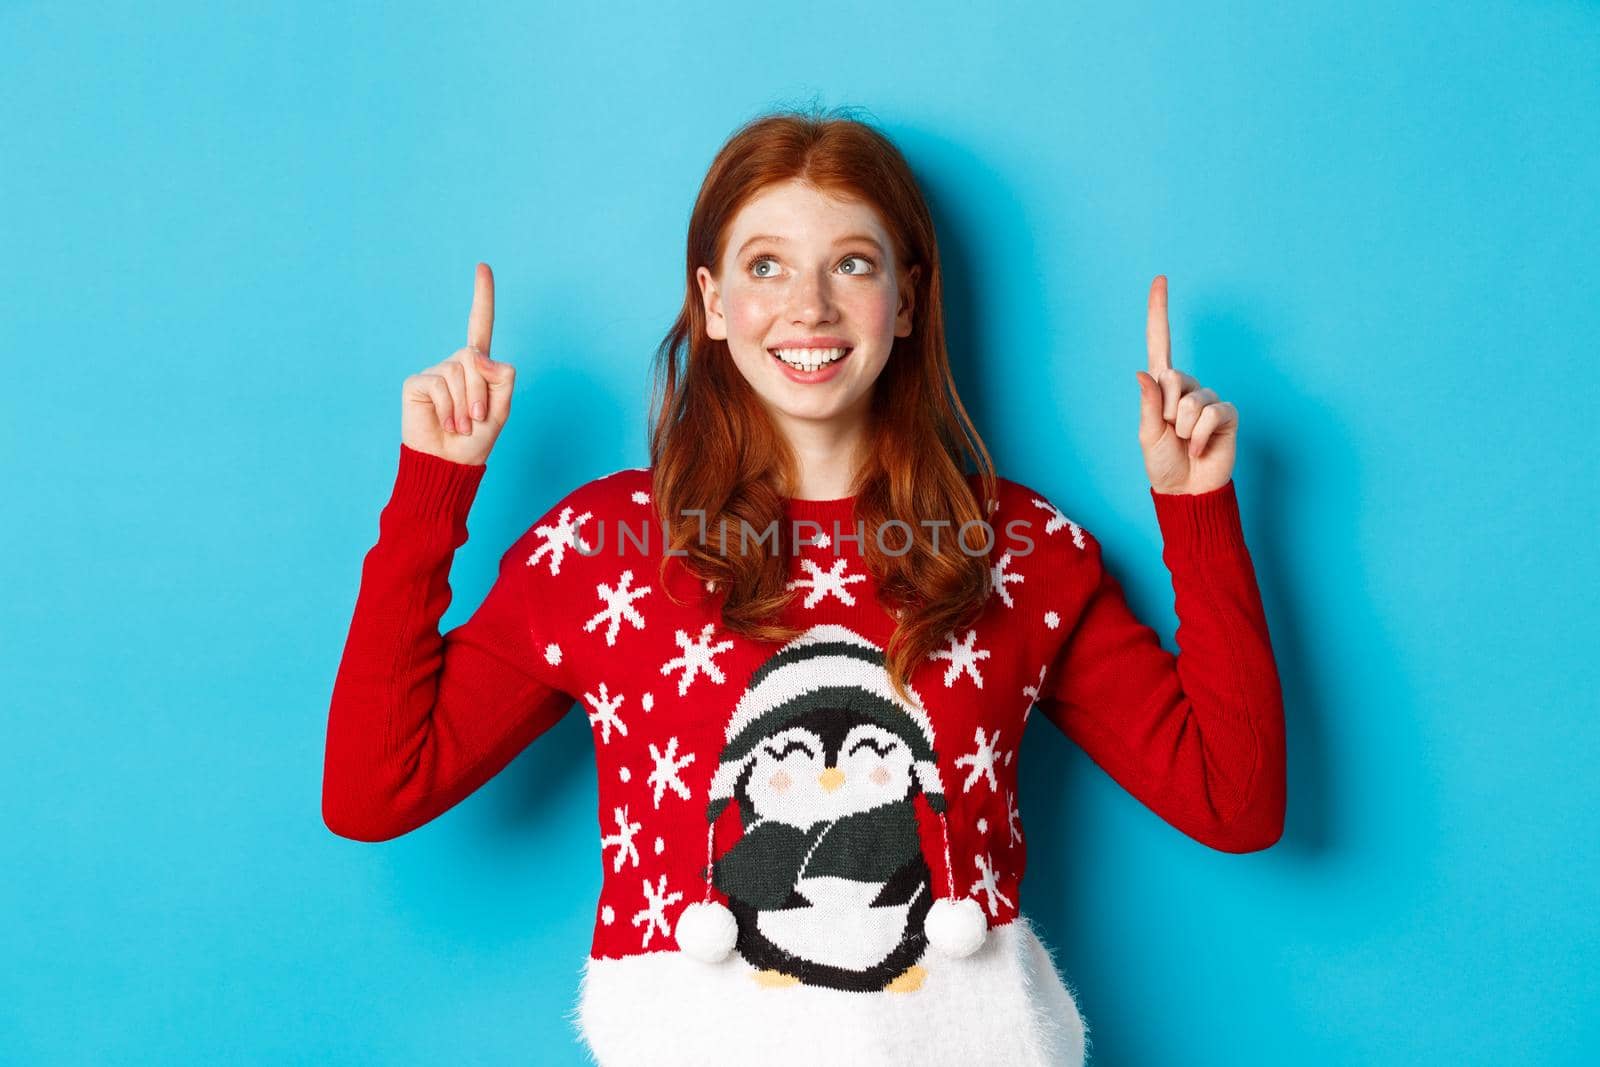 Winter holidays and celebration concept. Cheerful teen girl with red hair, looking dreamy at logo, pointing fingers up, showing advertisement, standing over blue background.